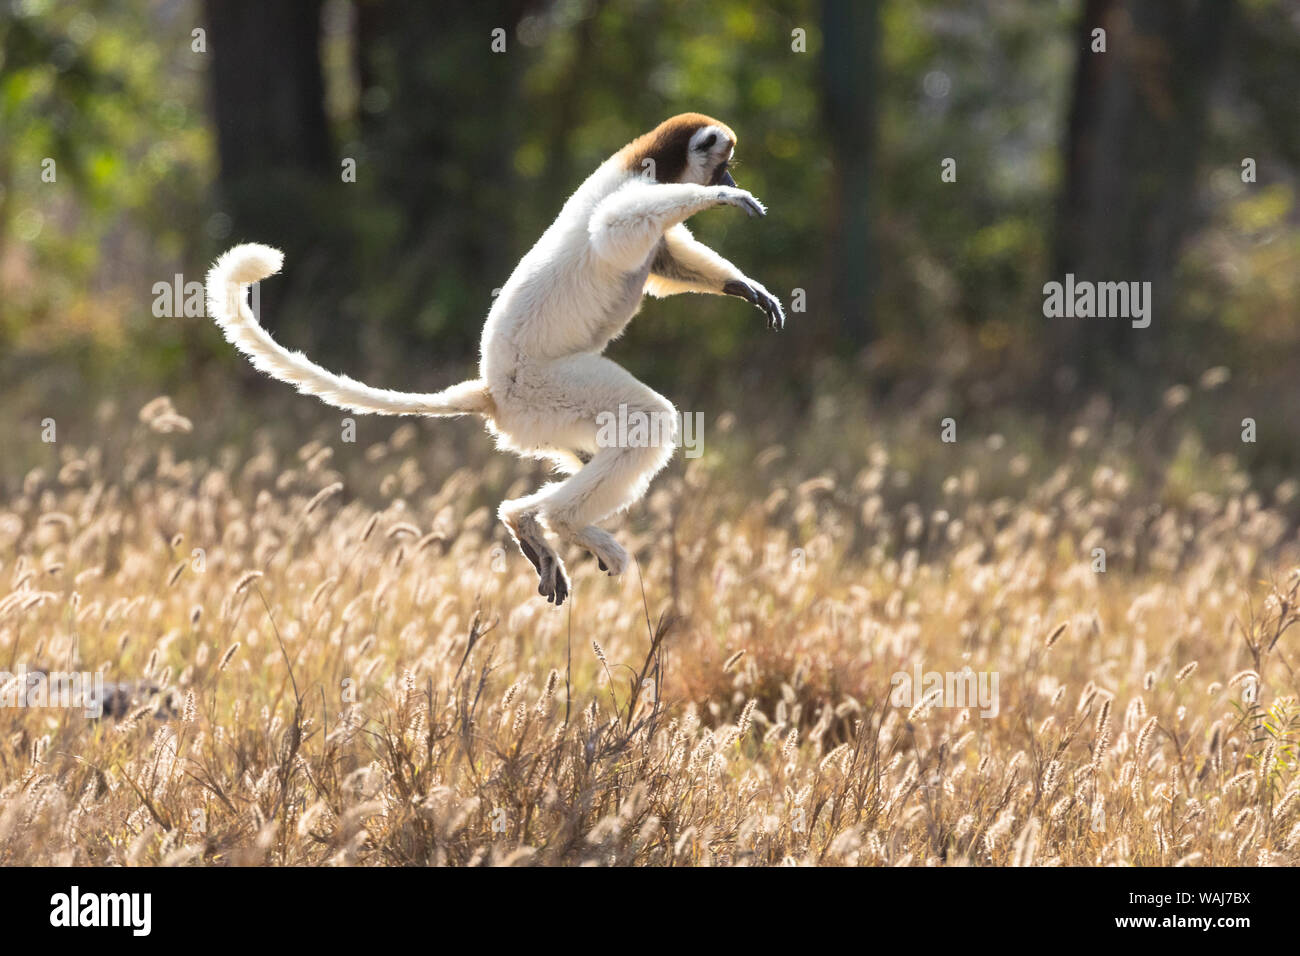 Africa, Madagascar, Berenty Reserve. A Verreaux's sifaka (Propithecus verreauxi) dancing from place to place where there are no trees. Stock Photo